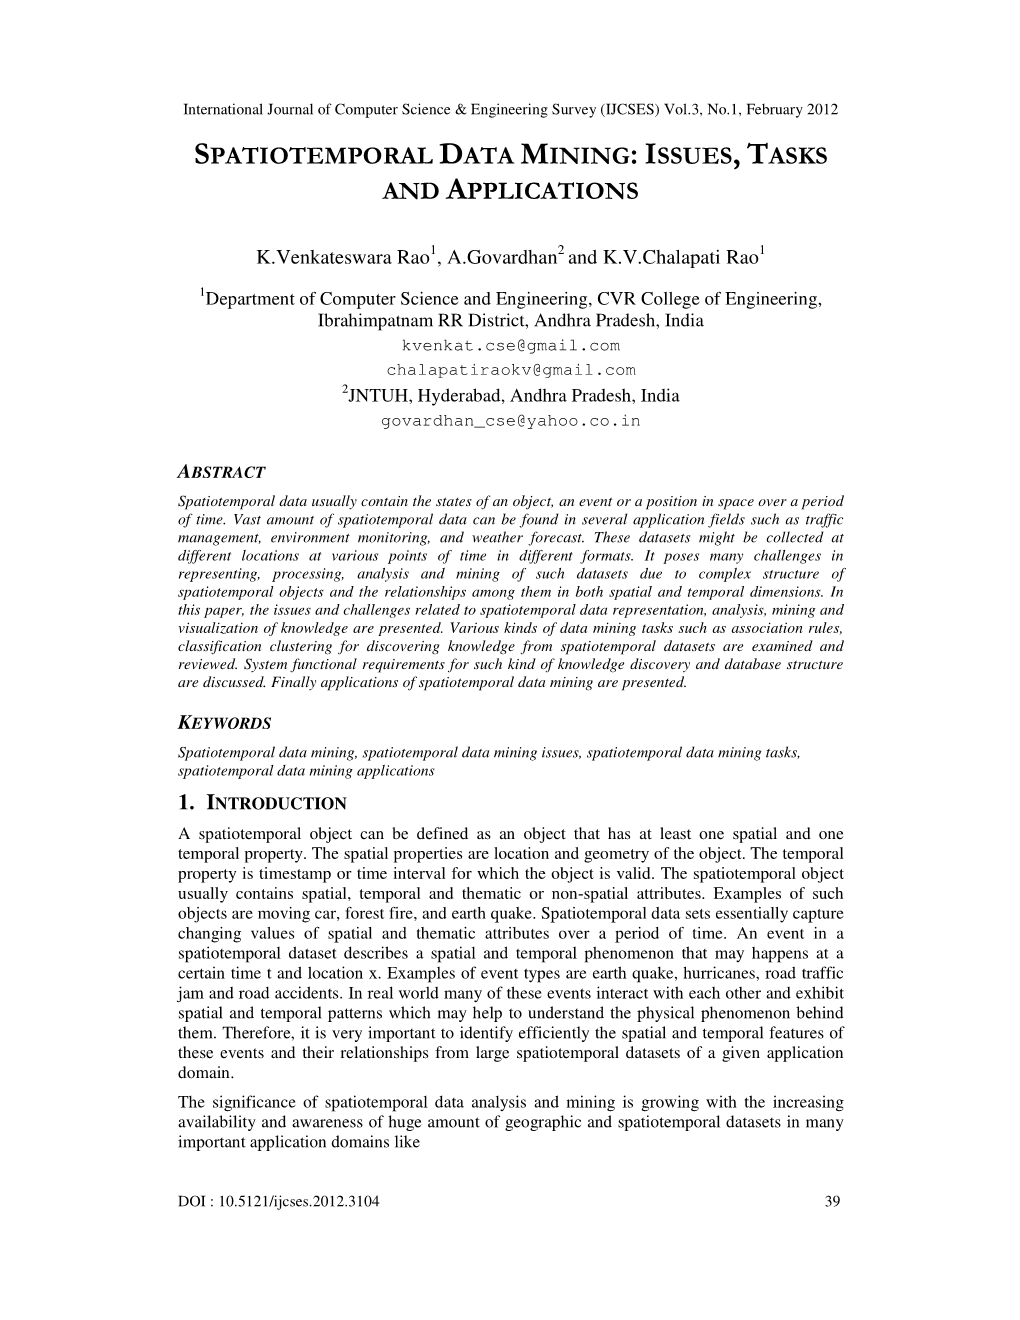 Spatiotemporal Data Mining: Issues, Tasks And